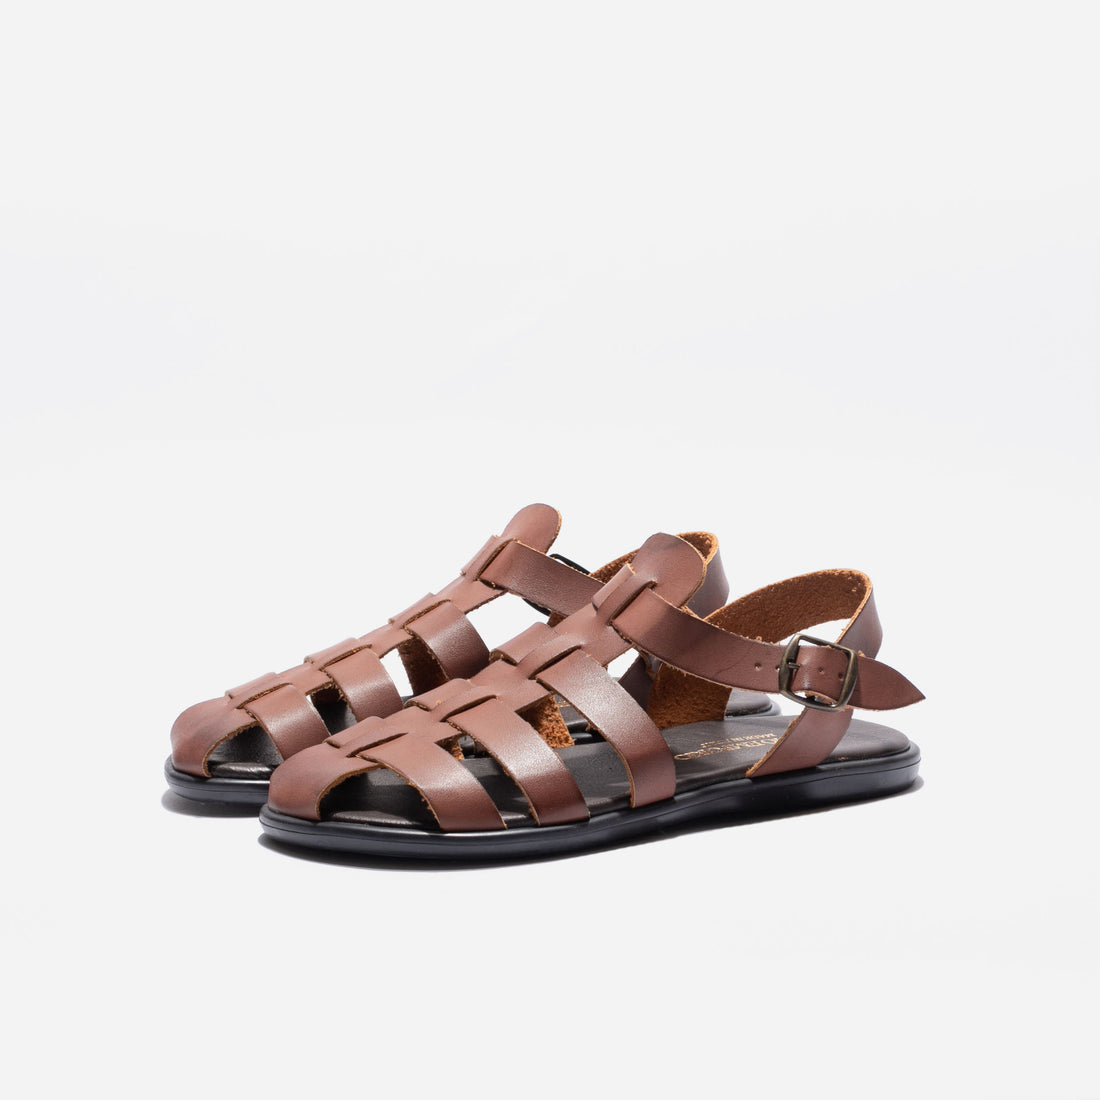 Sandal with three bands - Moro